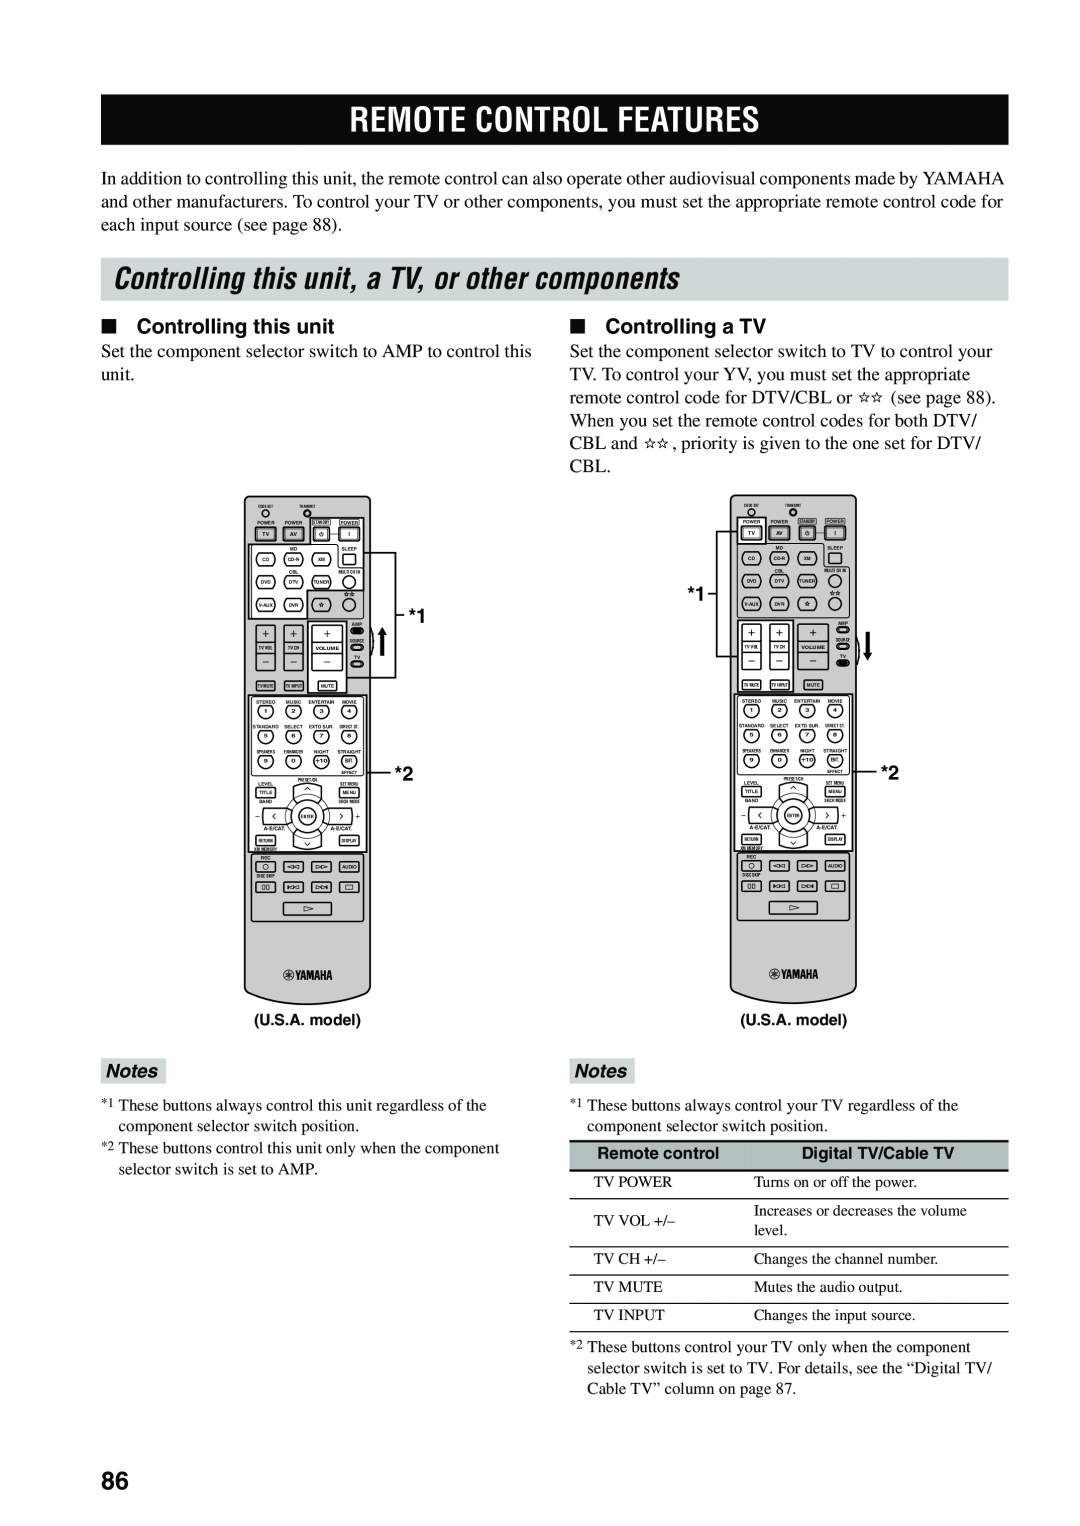 Yamaha HTR-5940 AV Remote Control Features, Controlling this unit, a TV, or other components, Controlling a TV, Notes 